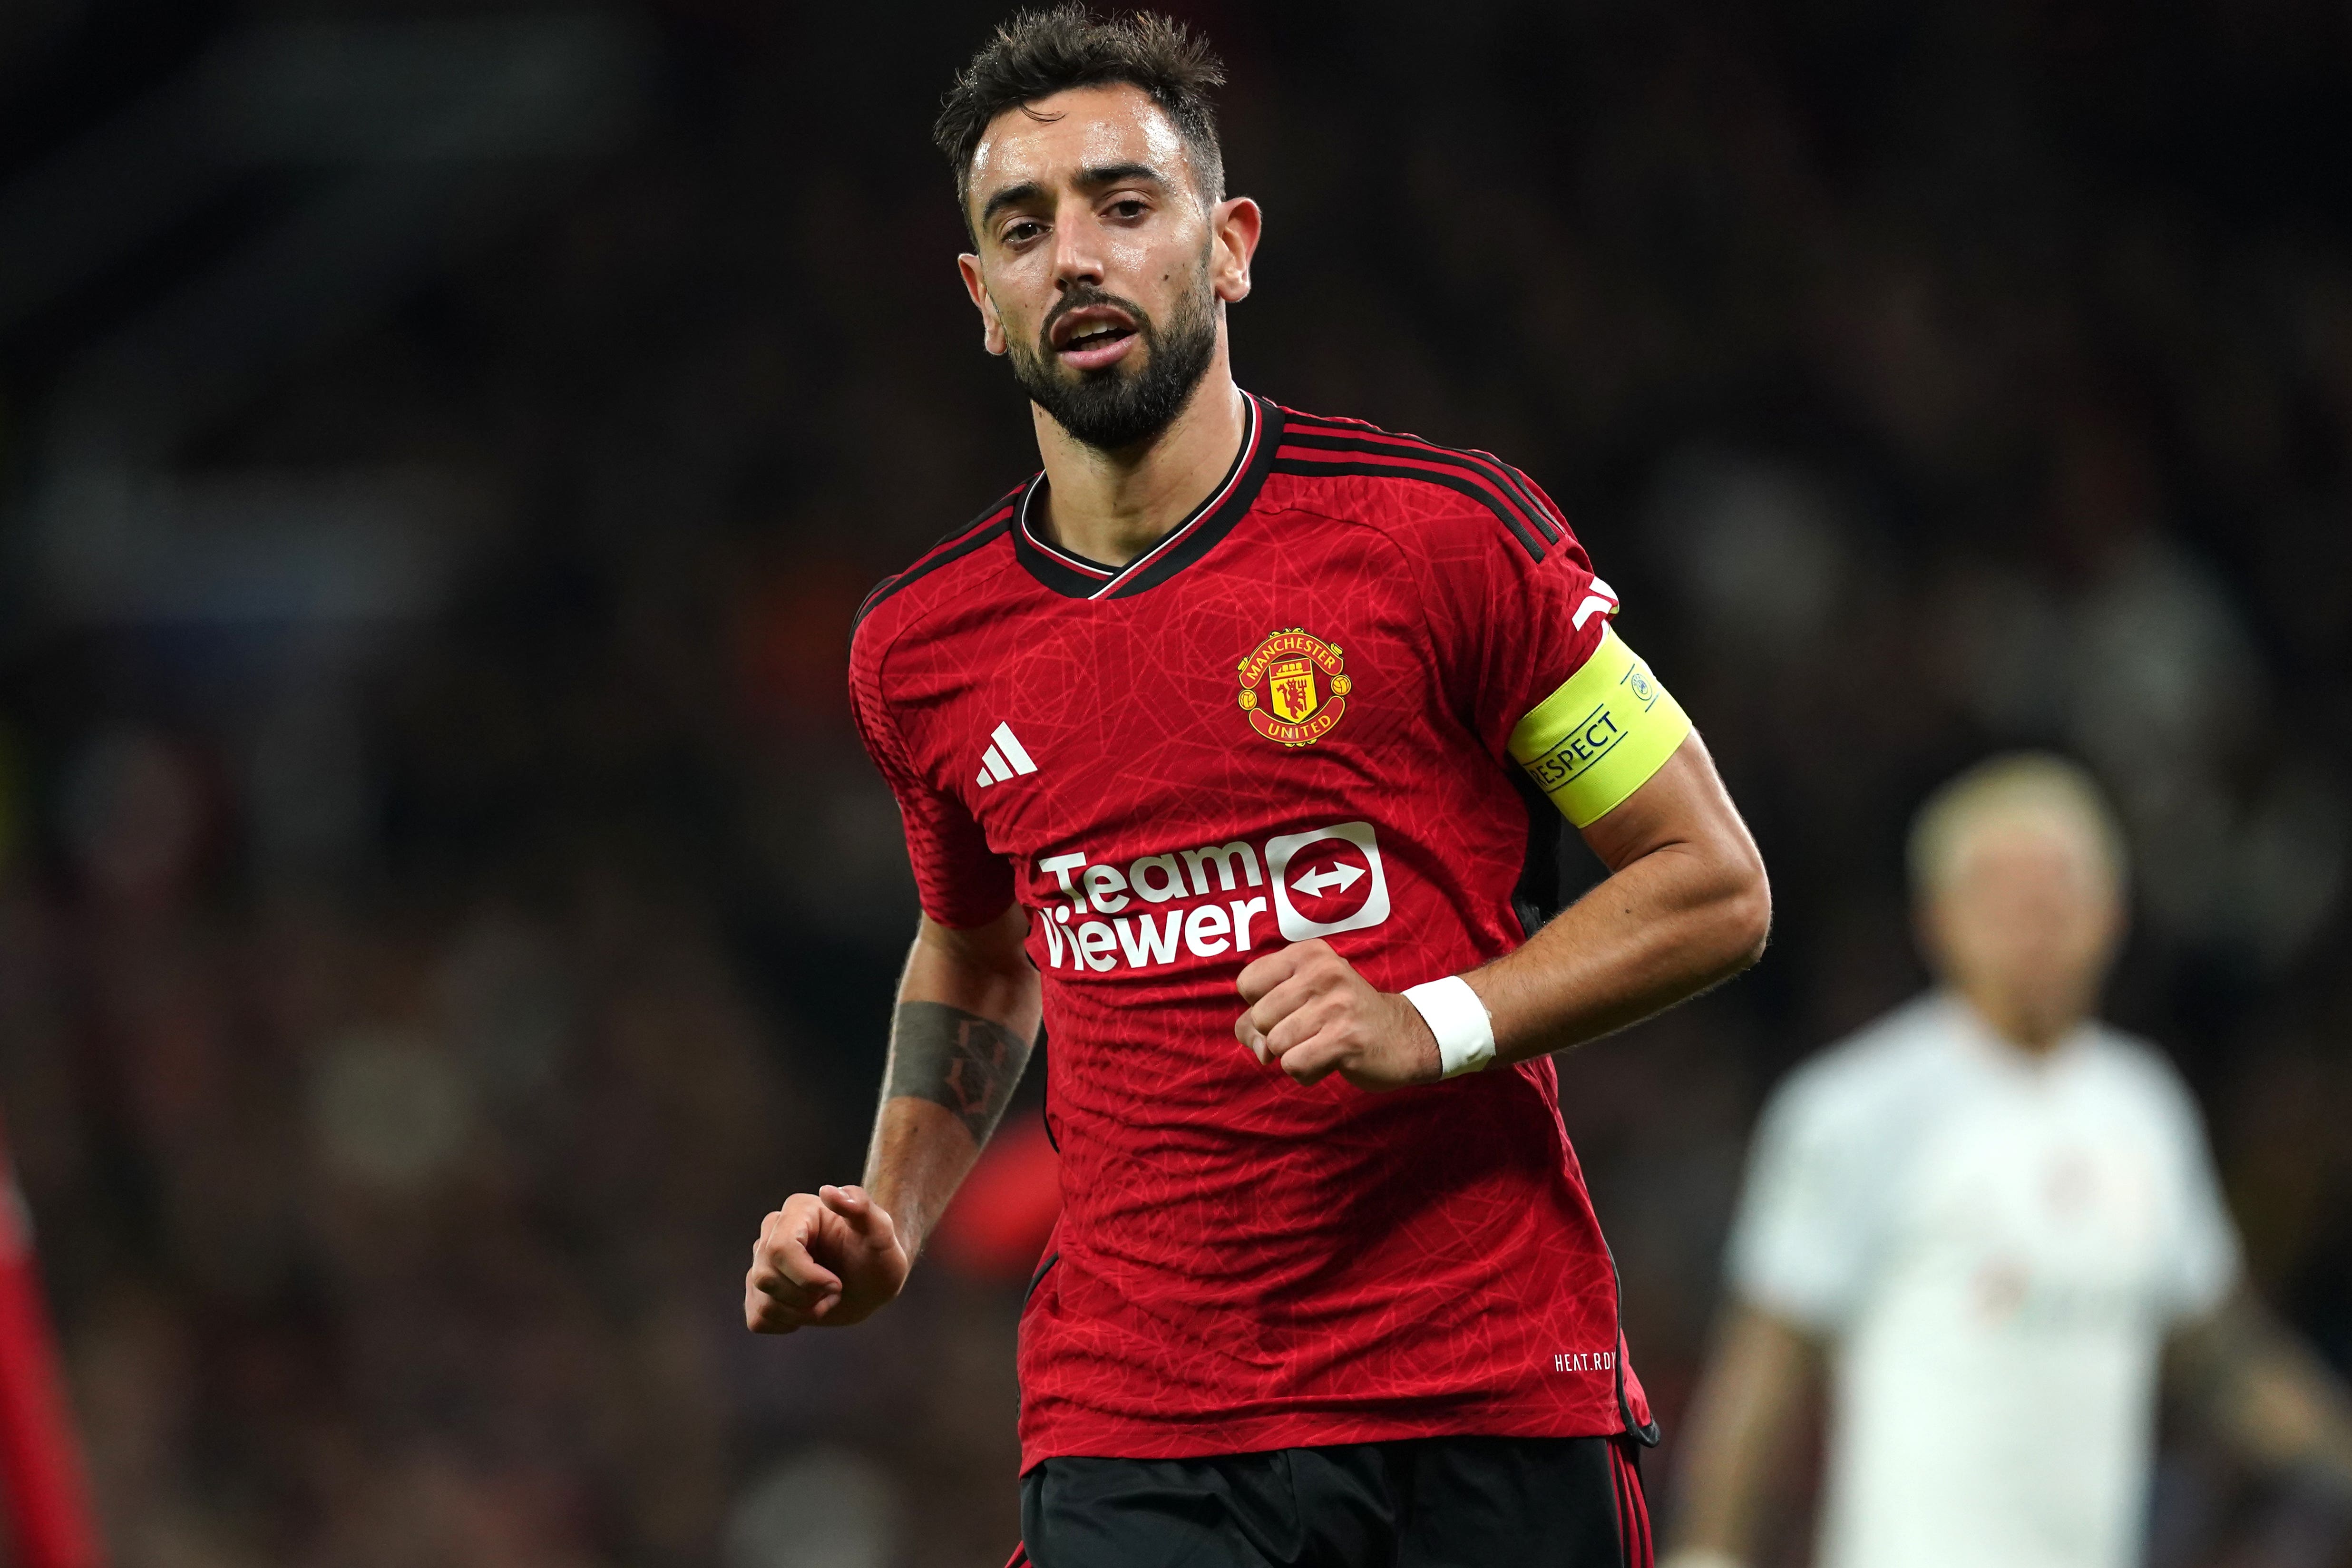 Bruno Fernandes’ role as captain has attracted criticism